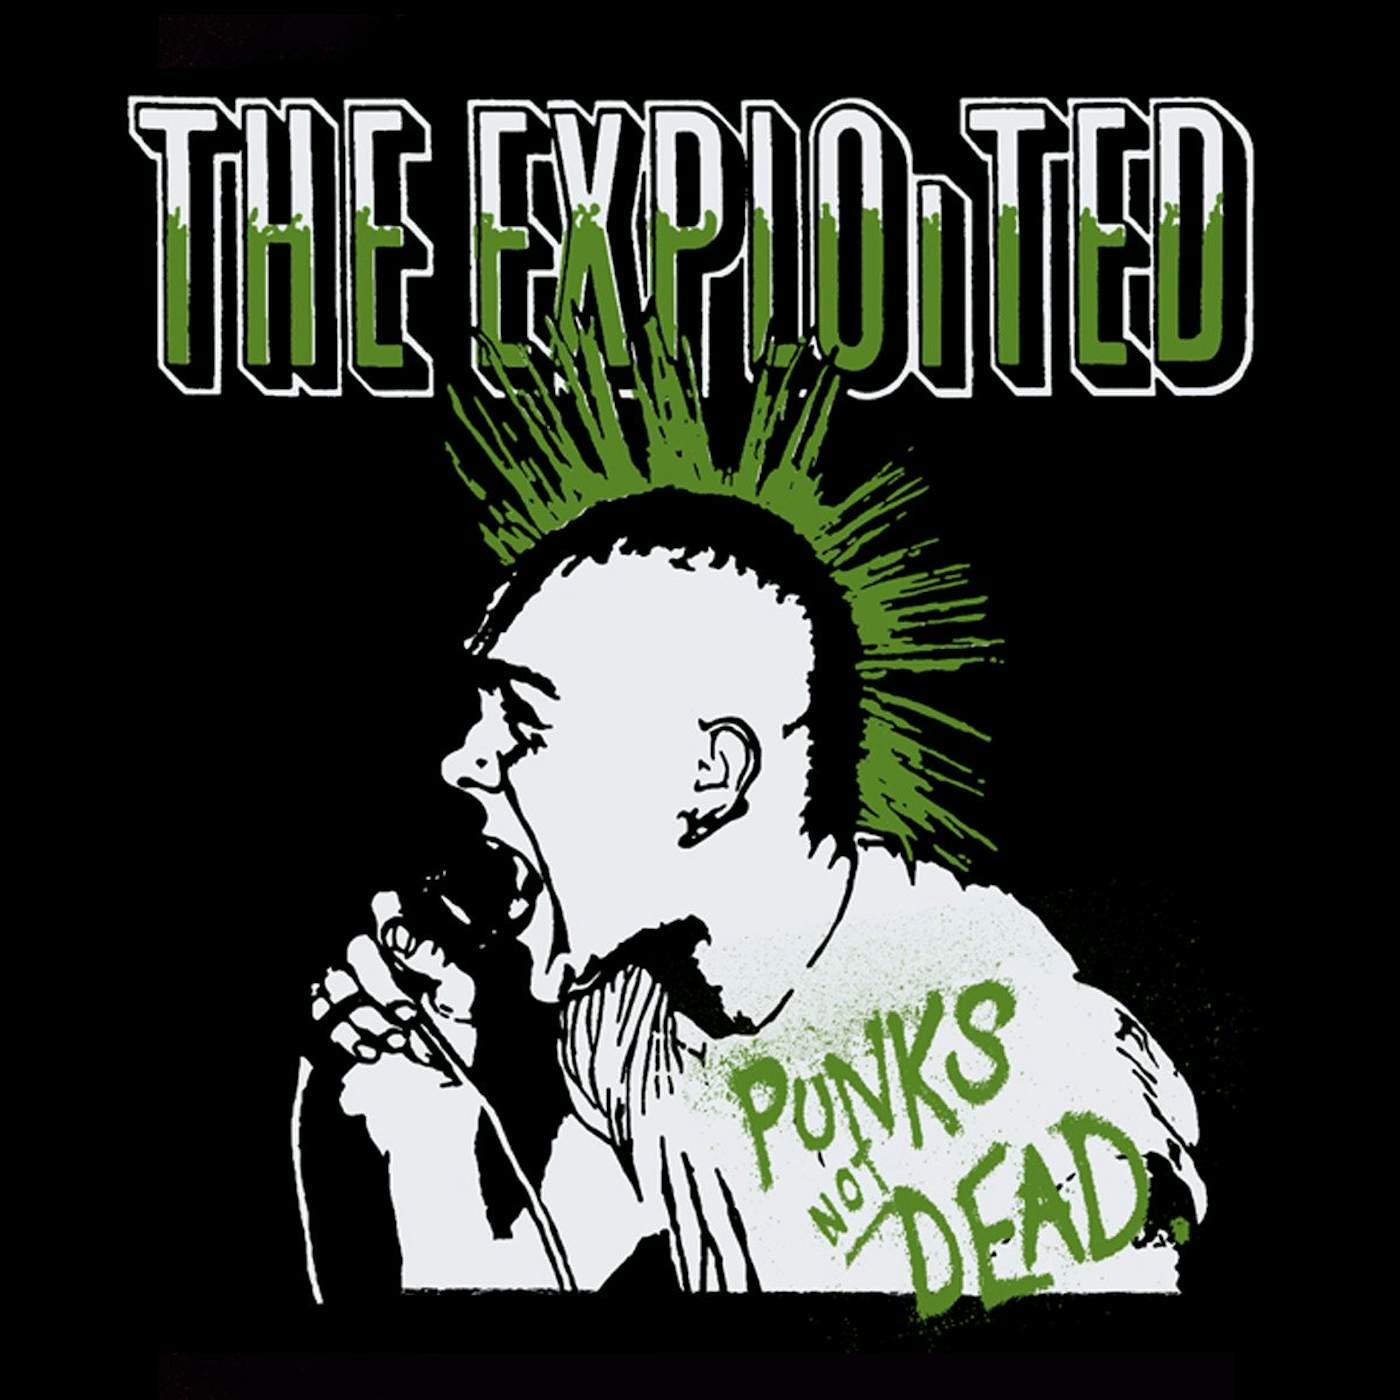 The Exploited "Punks" Back Patch